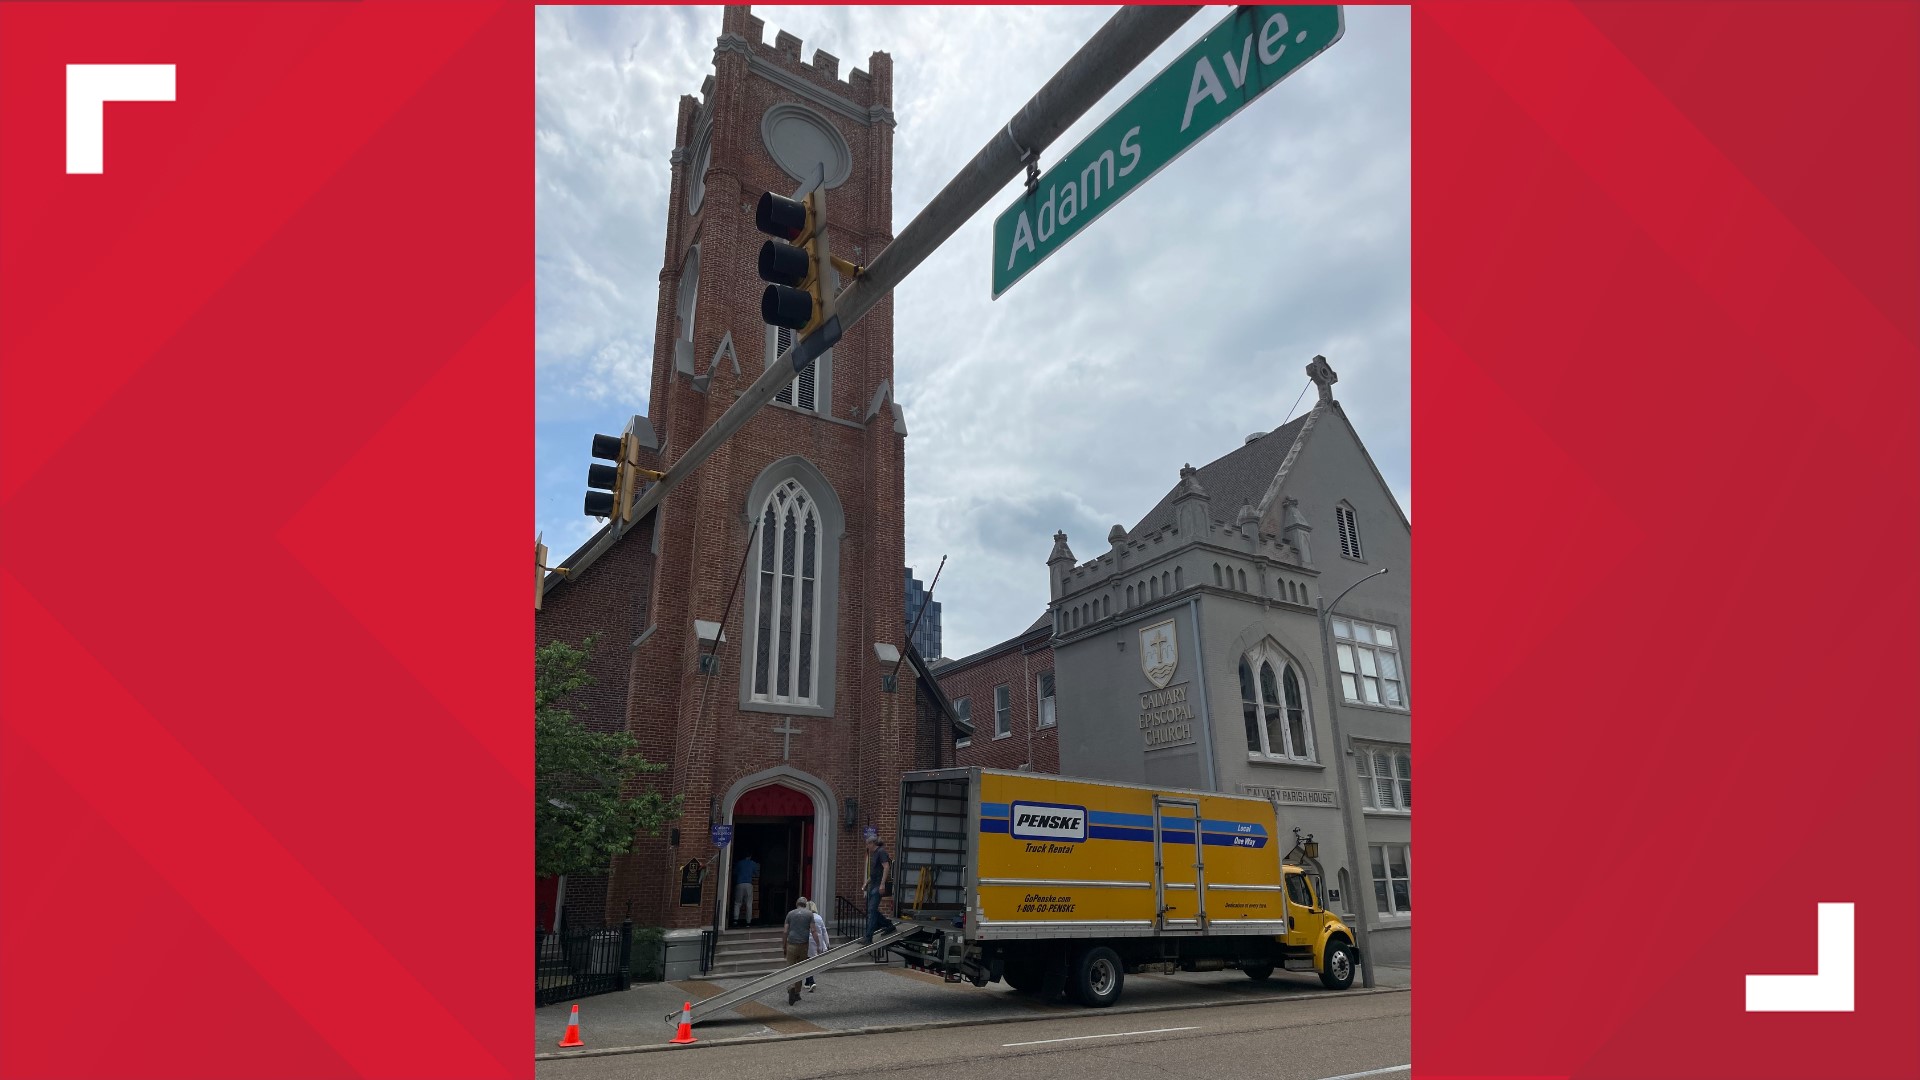 Calvary Episcopal Church on N. 2nd St. said about 2,000 historic organ pipes had been loaded onto a 26-foor yellow Penske moving truck with plates T65589.